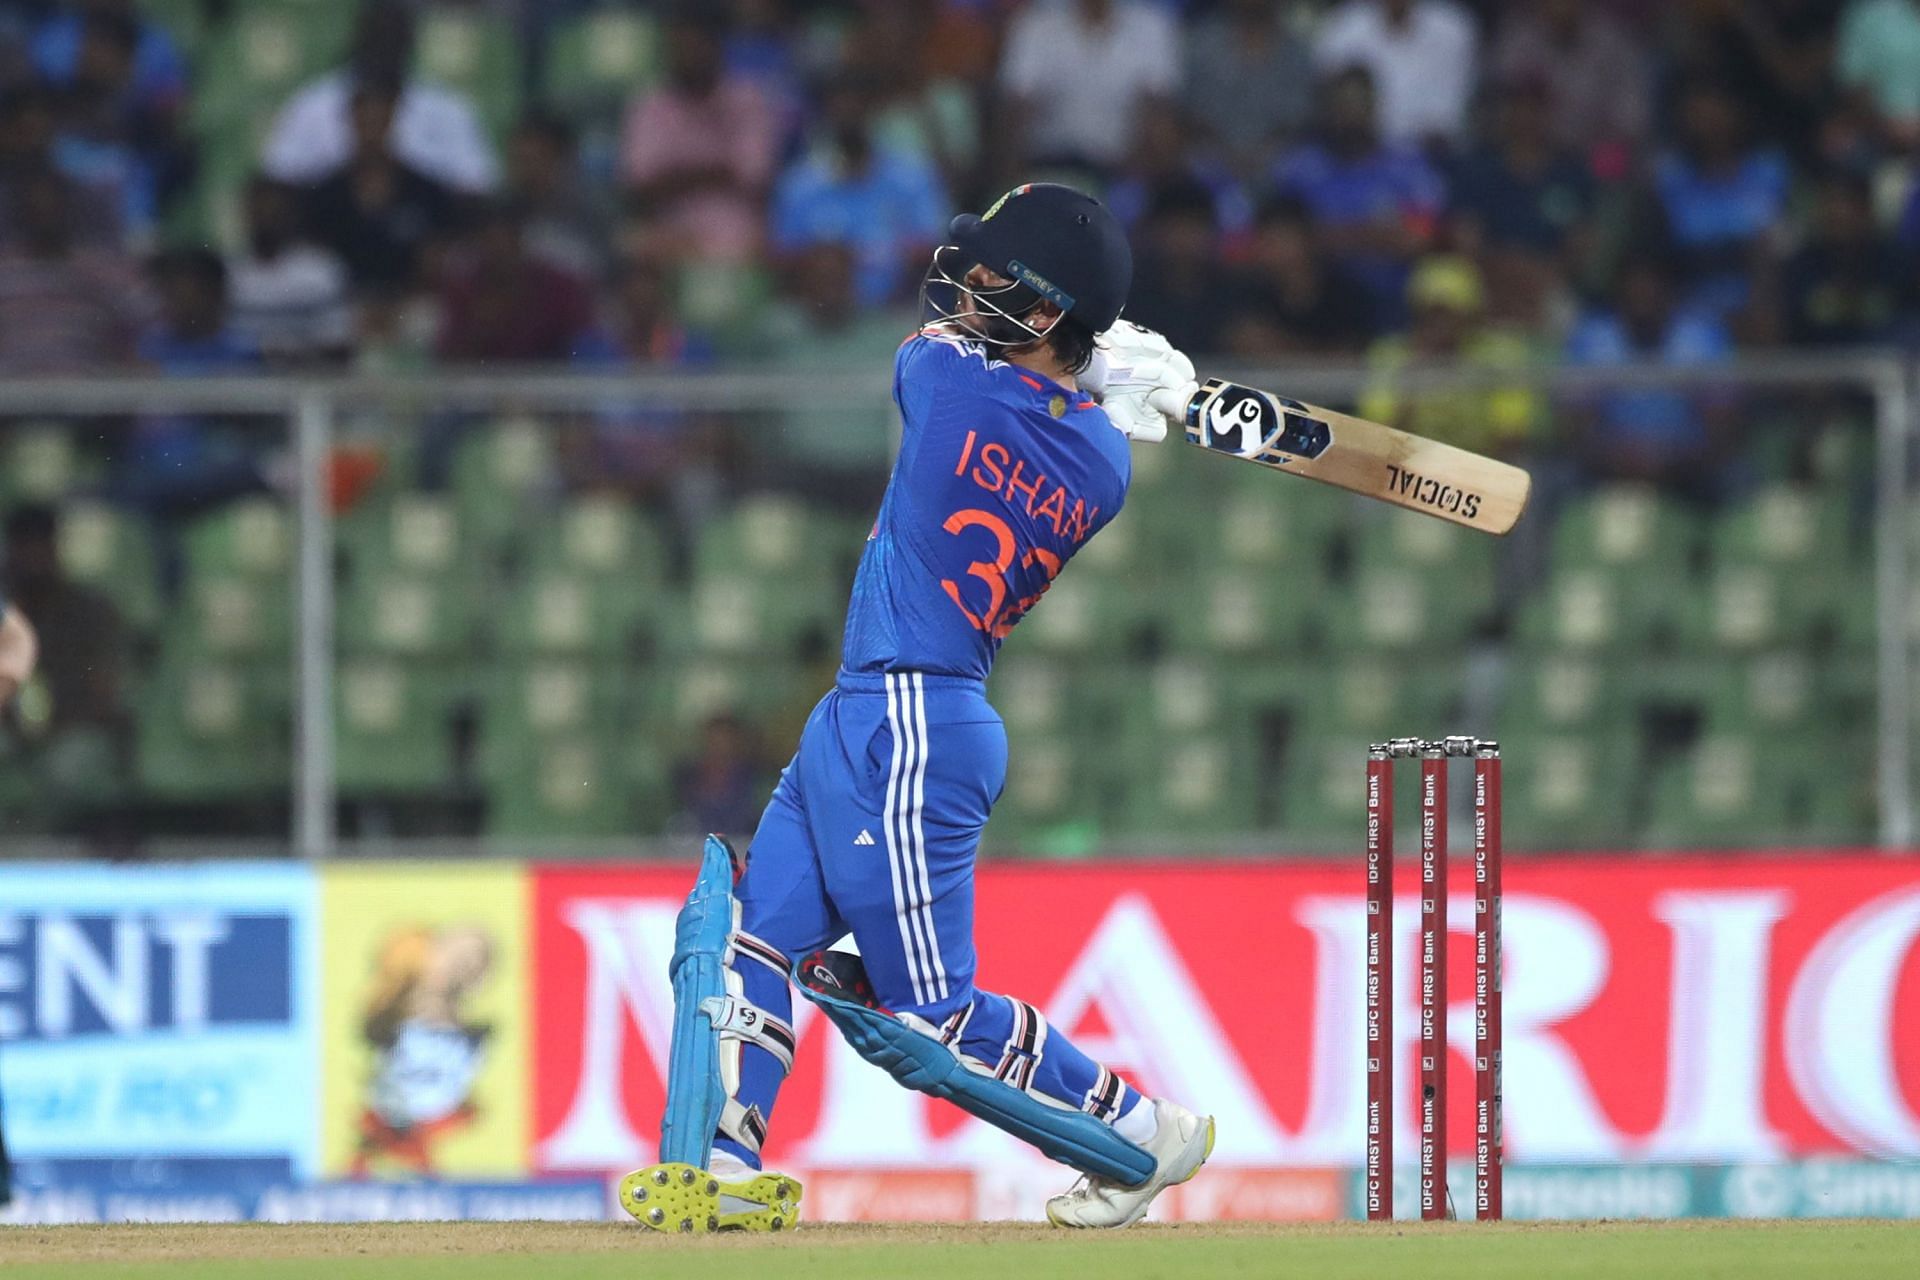 Ishan Kishan has batted only once below No. 3 in T20Is. [P/C: Getty]